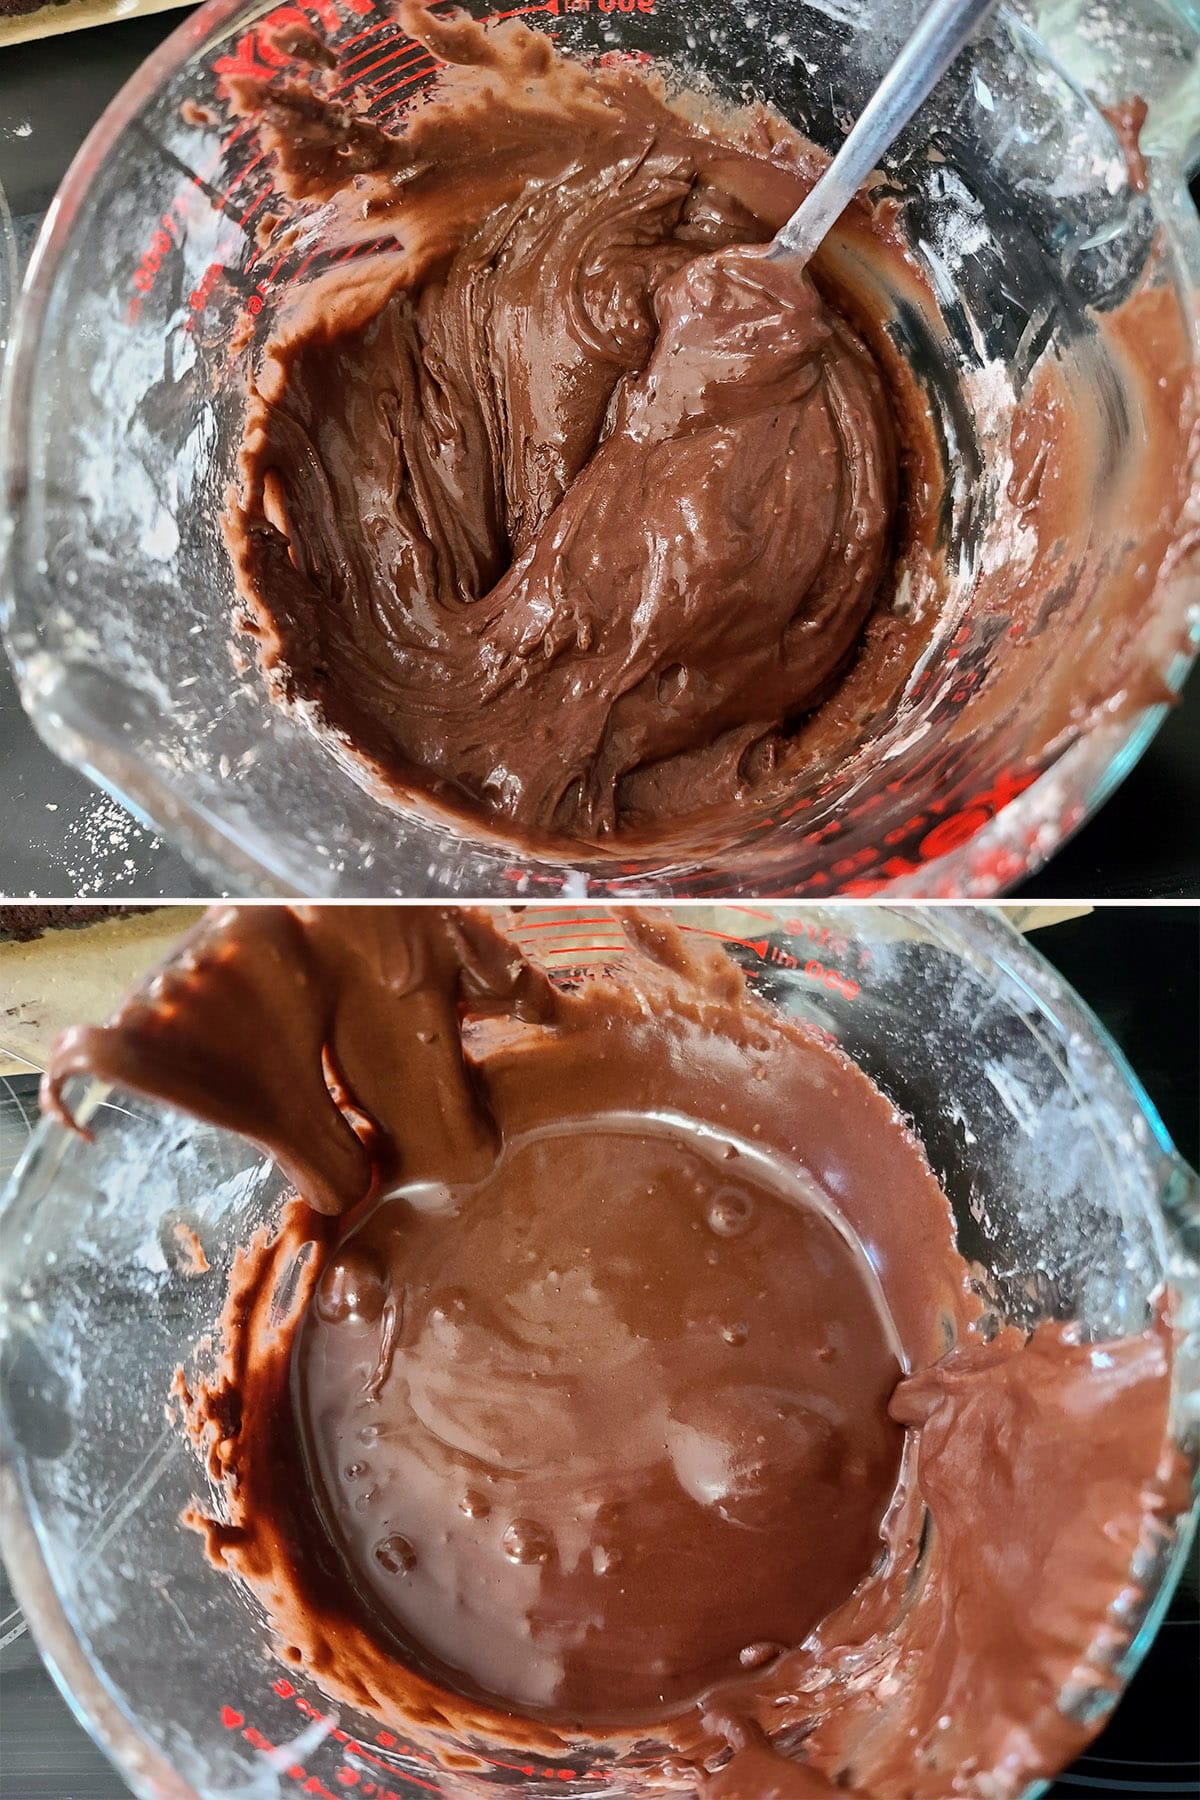 A 2 part image showing the glaze before and after being microwaved.